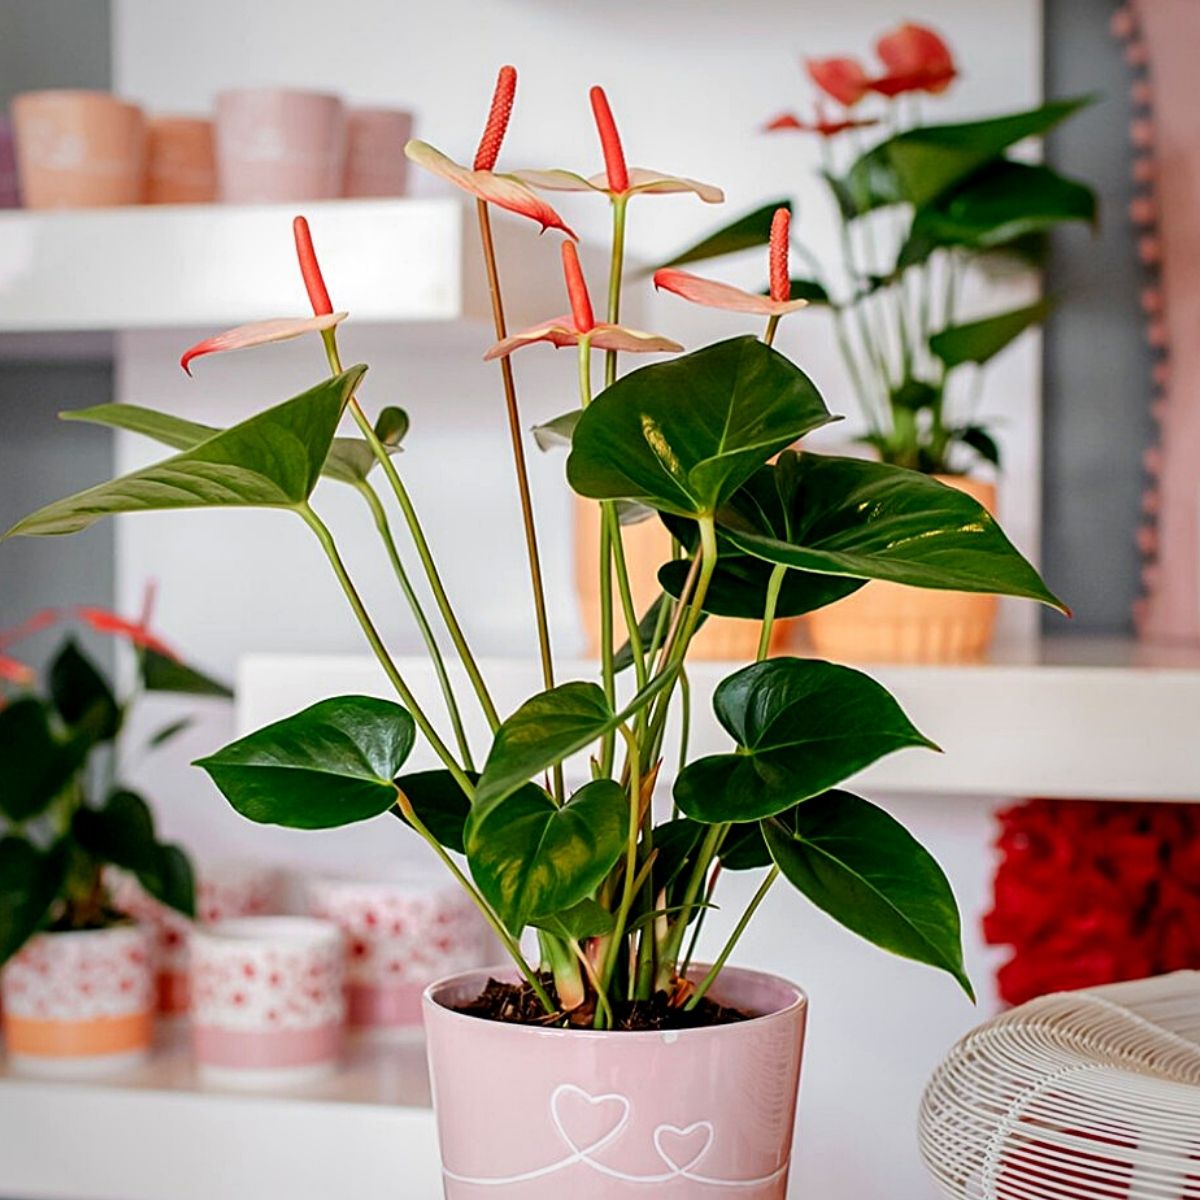 ​Fair Flora Gives Sustainable Plants a 'Face'